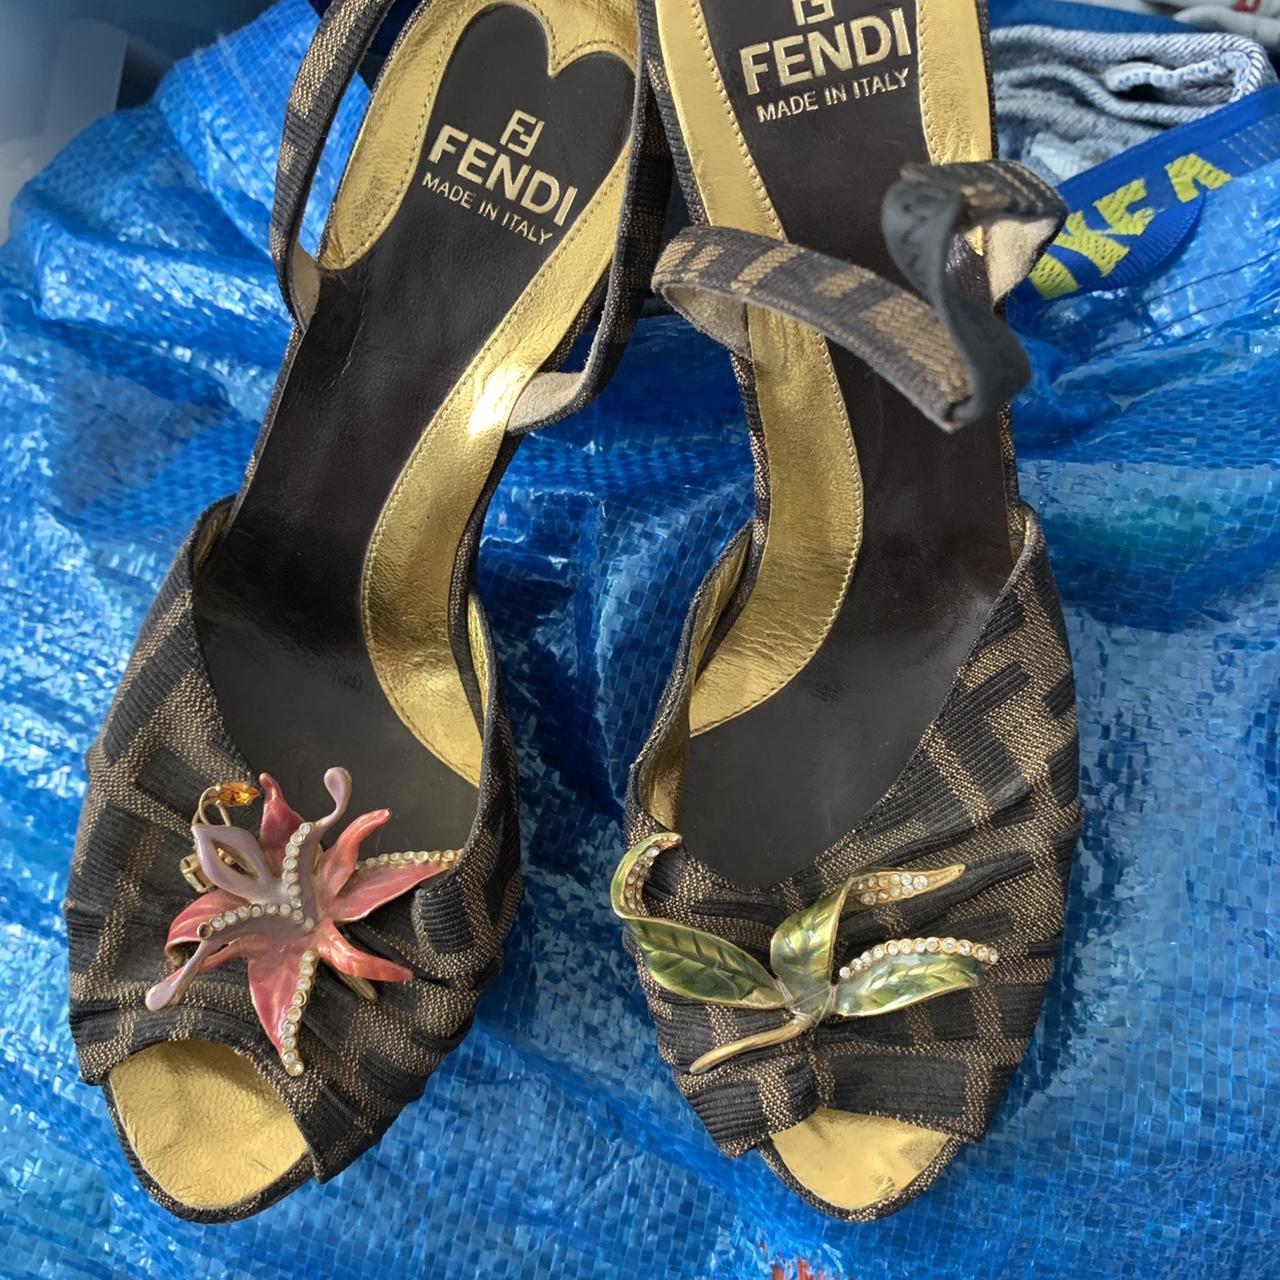 Used beautiful Canvas FENDI HEELS with stretchable... - Depop